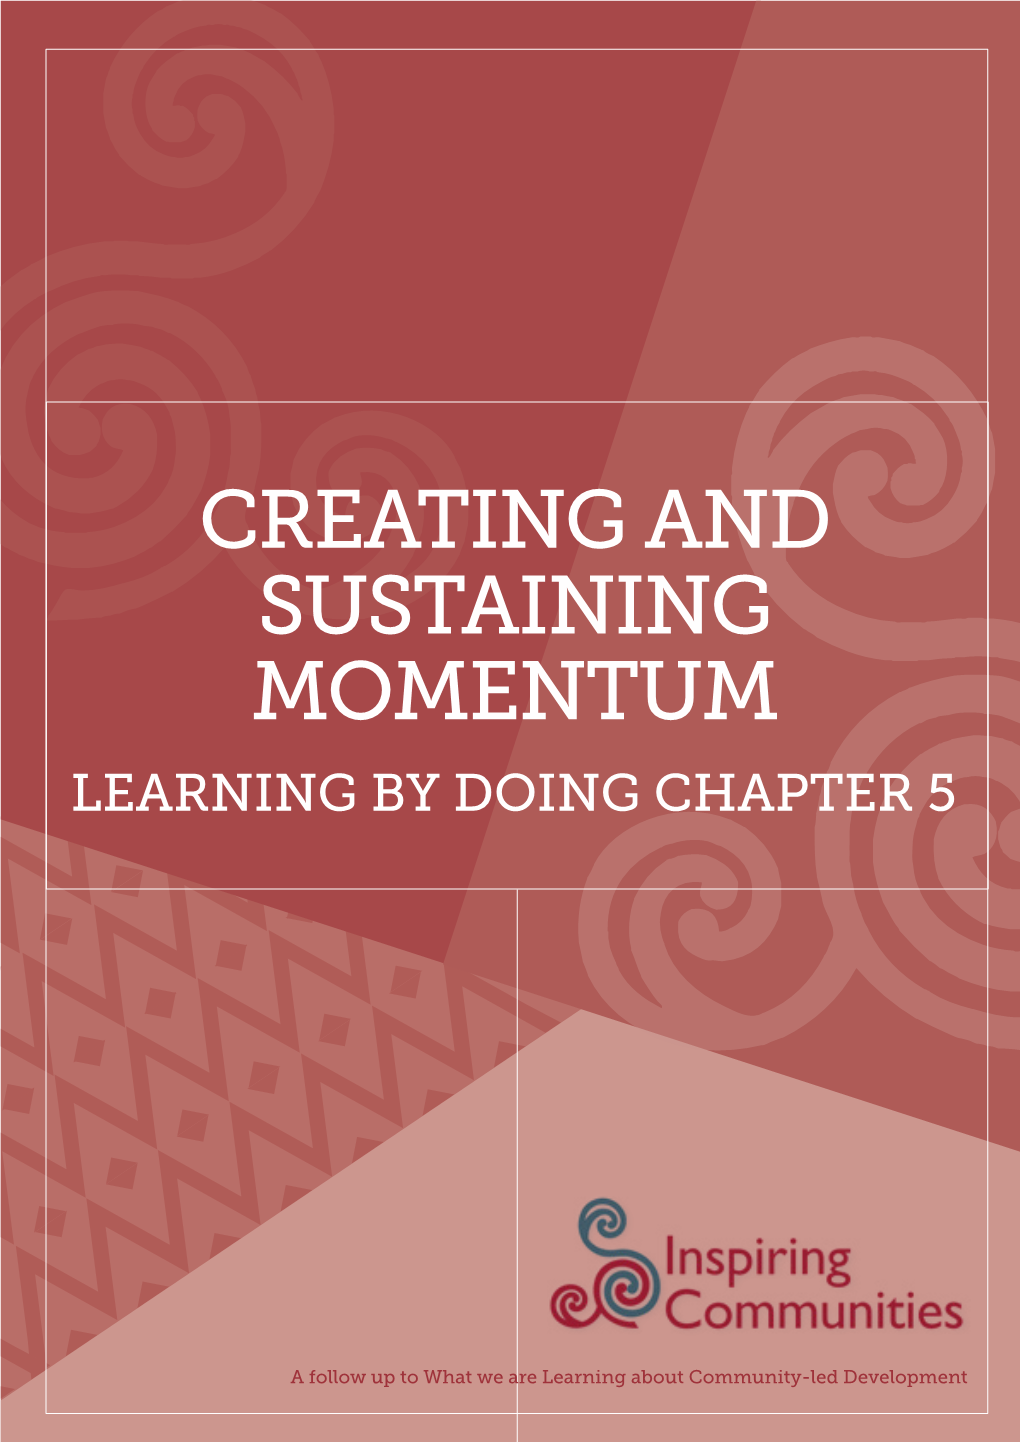 Chapter 5 – Creating and Sustaining Momentum